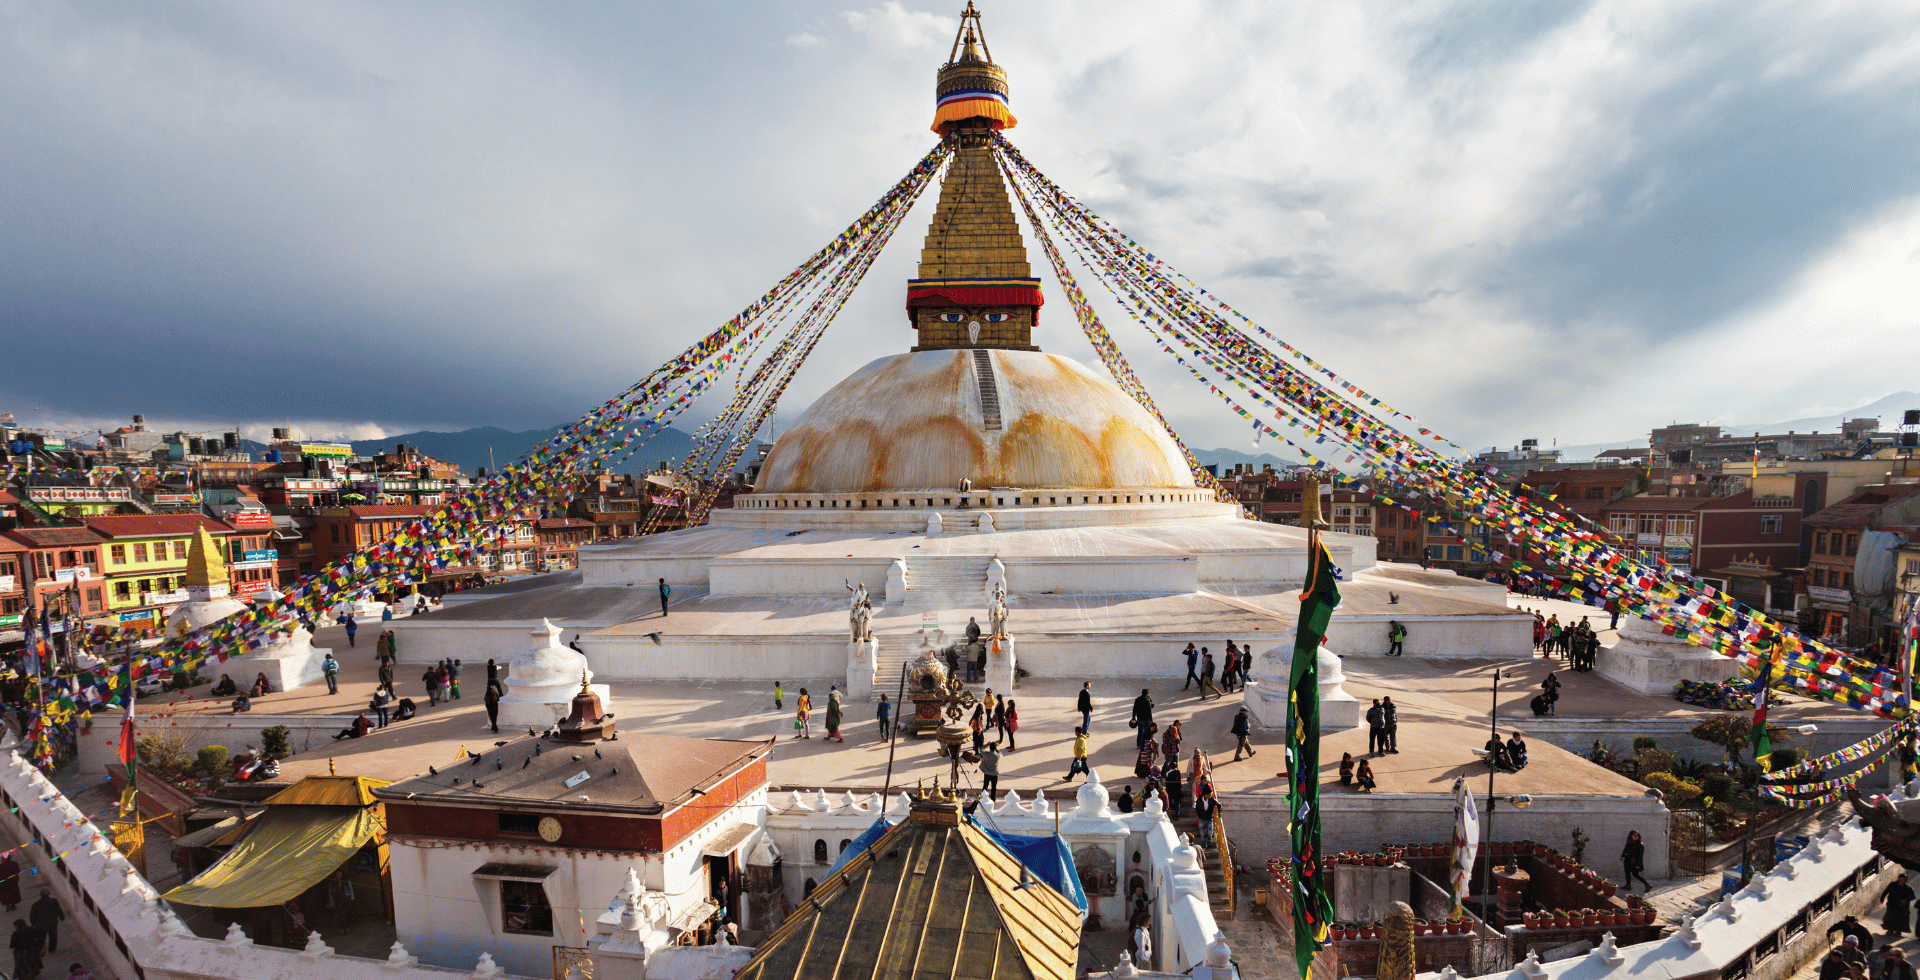 Drive from Beshisahar to Kathmandu.(6/7 hrs) and transfer to Hotel.'